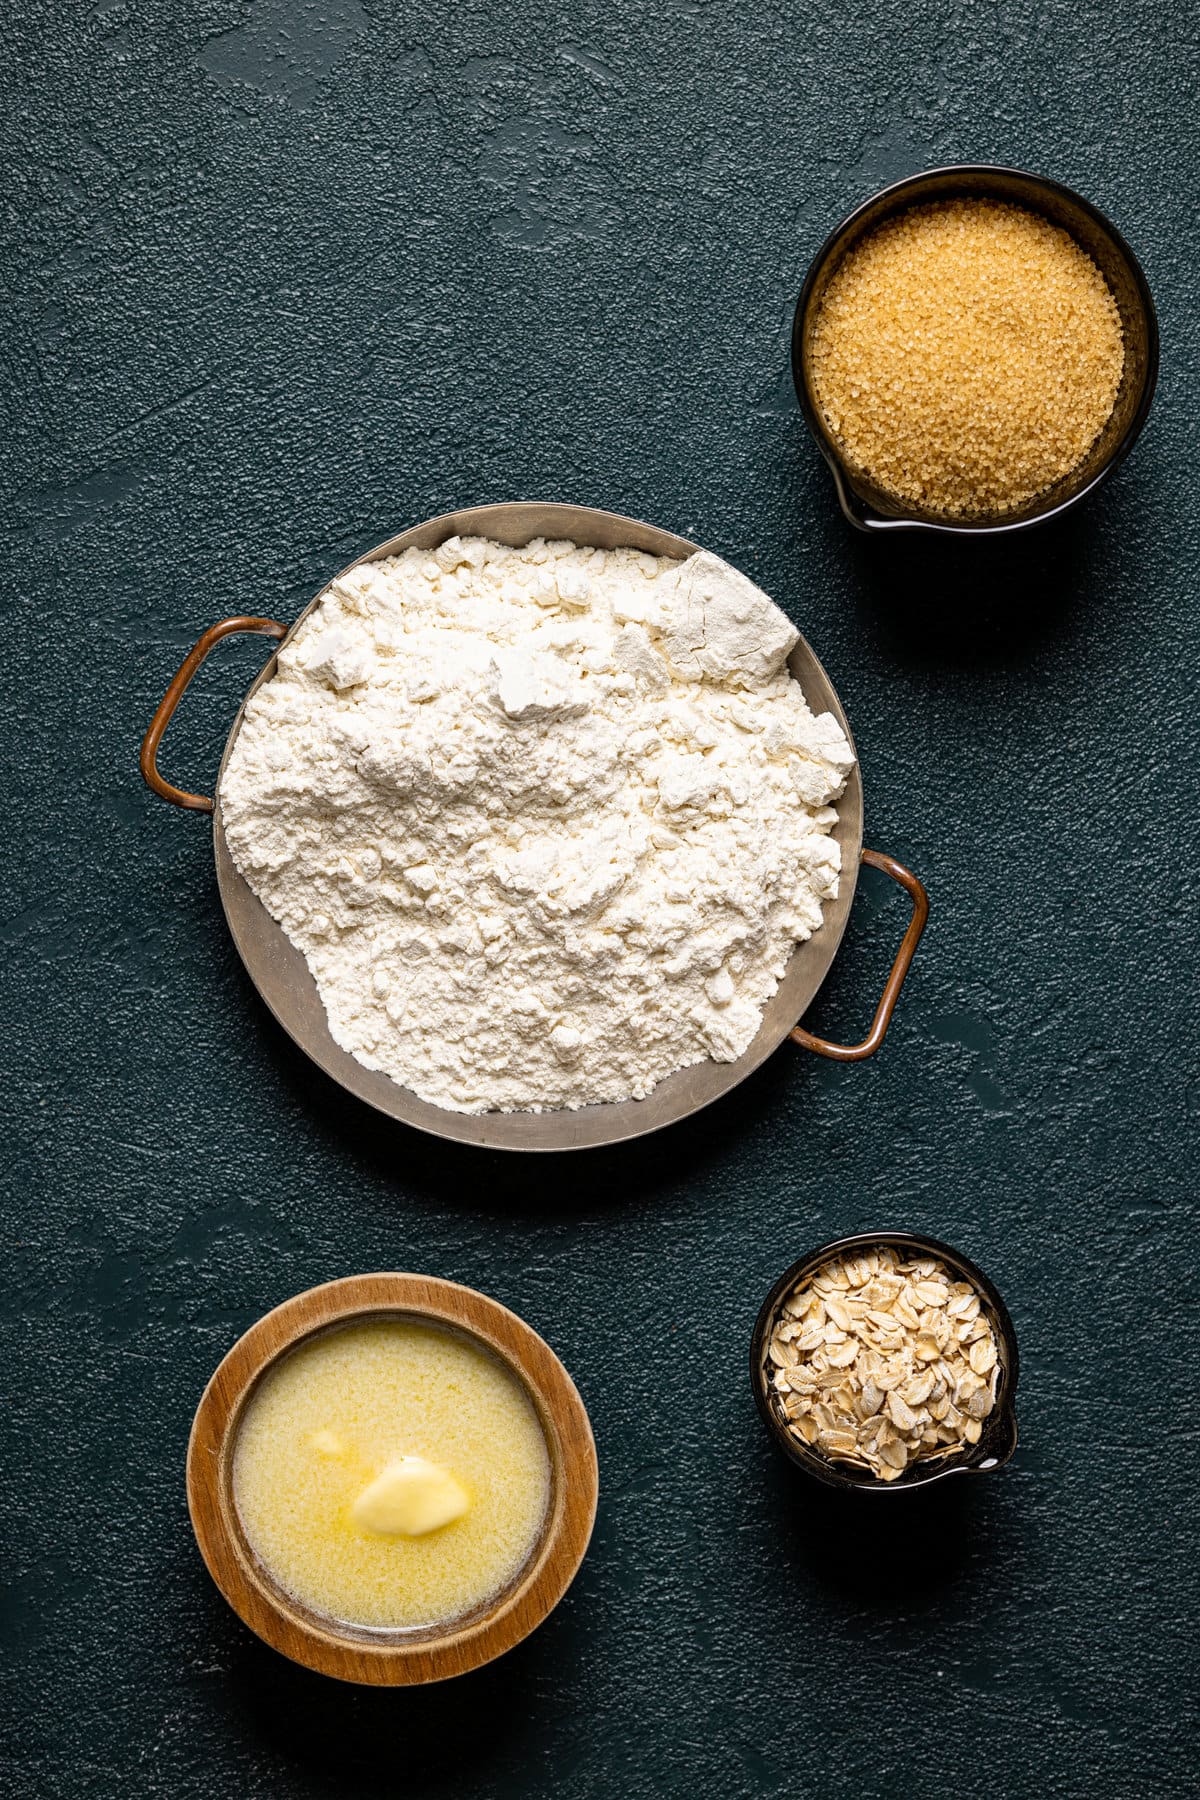 Ingredients for Dutch Apple Pie crumble topping including oats, butter, and flour